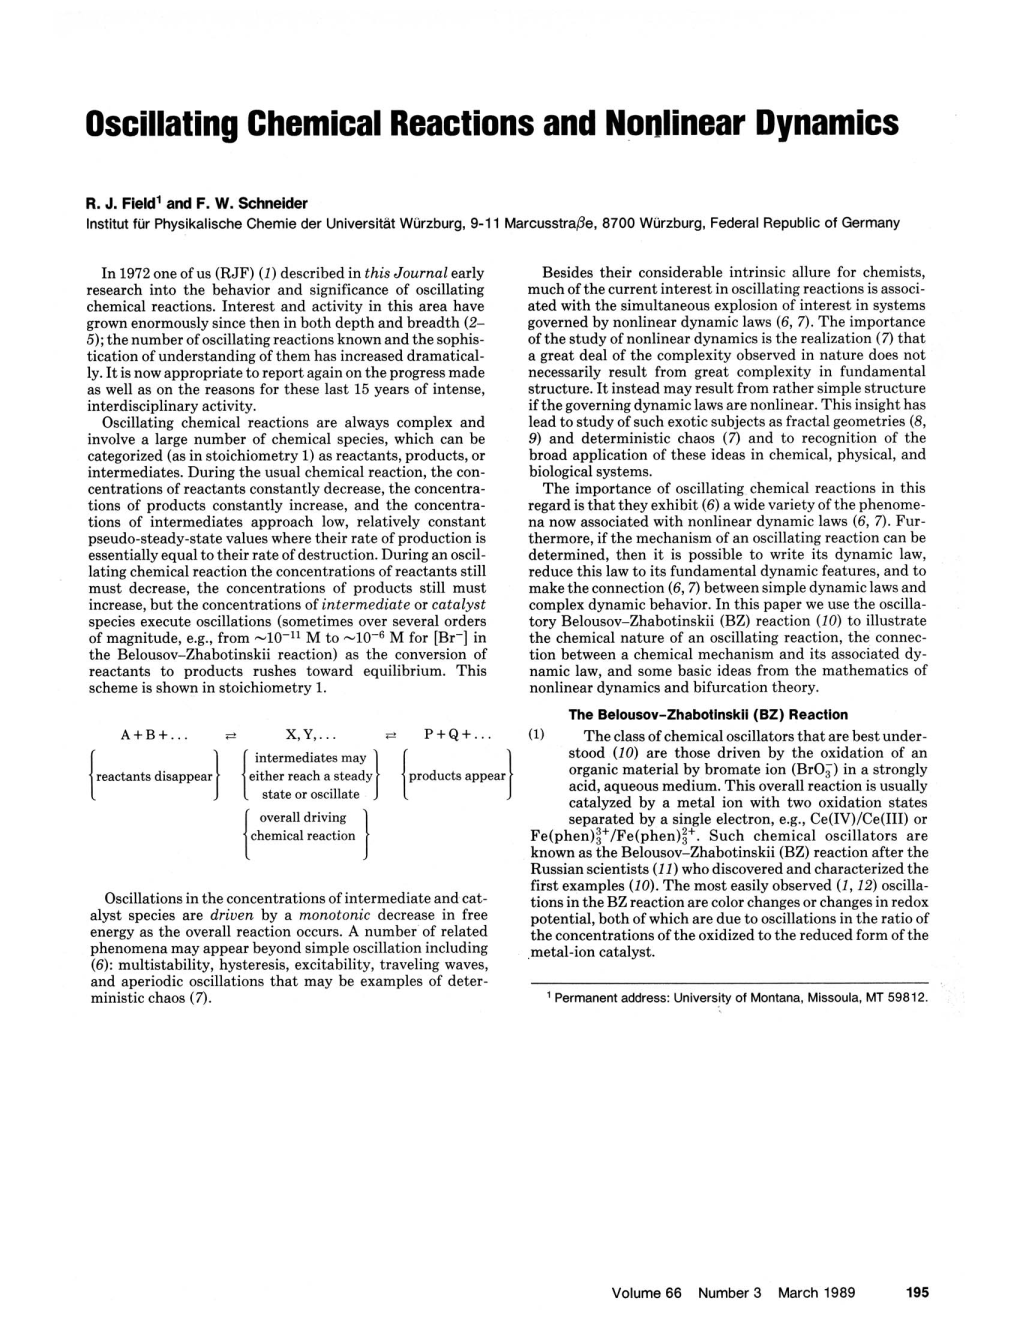 Oscillating Chemical Reactions and Nonlinear Dynamics